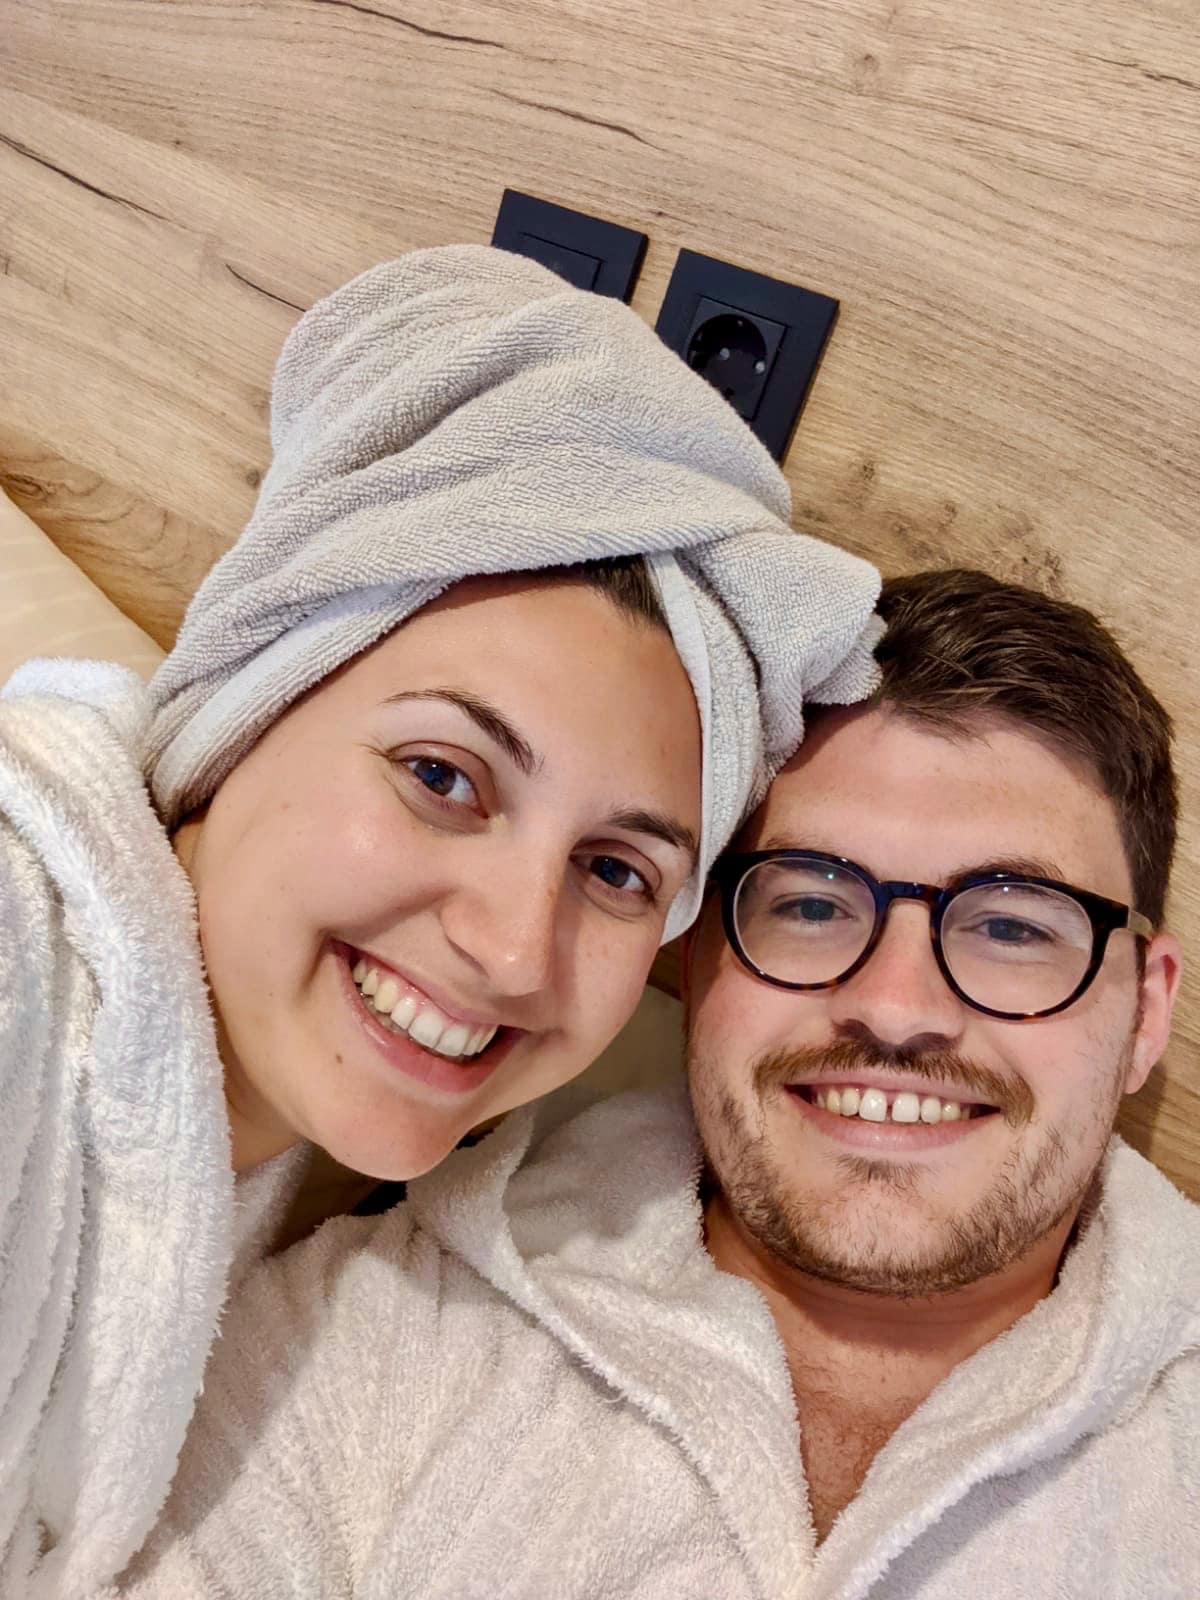 Glamping in Slovenia: Selfie of couple wearing towel robes and smiling at the camera. The girl has a towel on her head and both look happy and relaxed